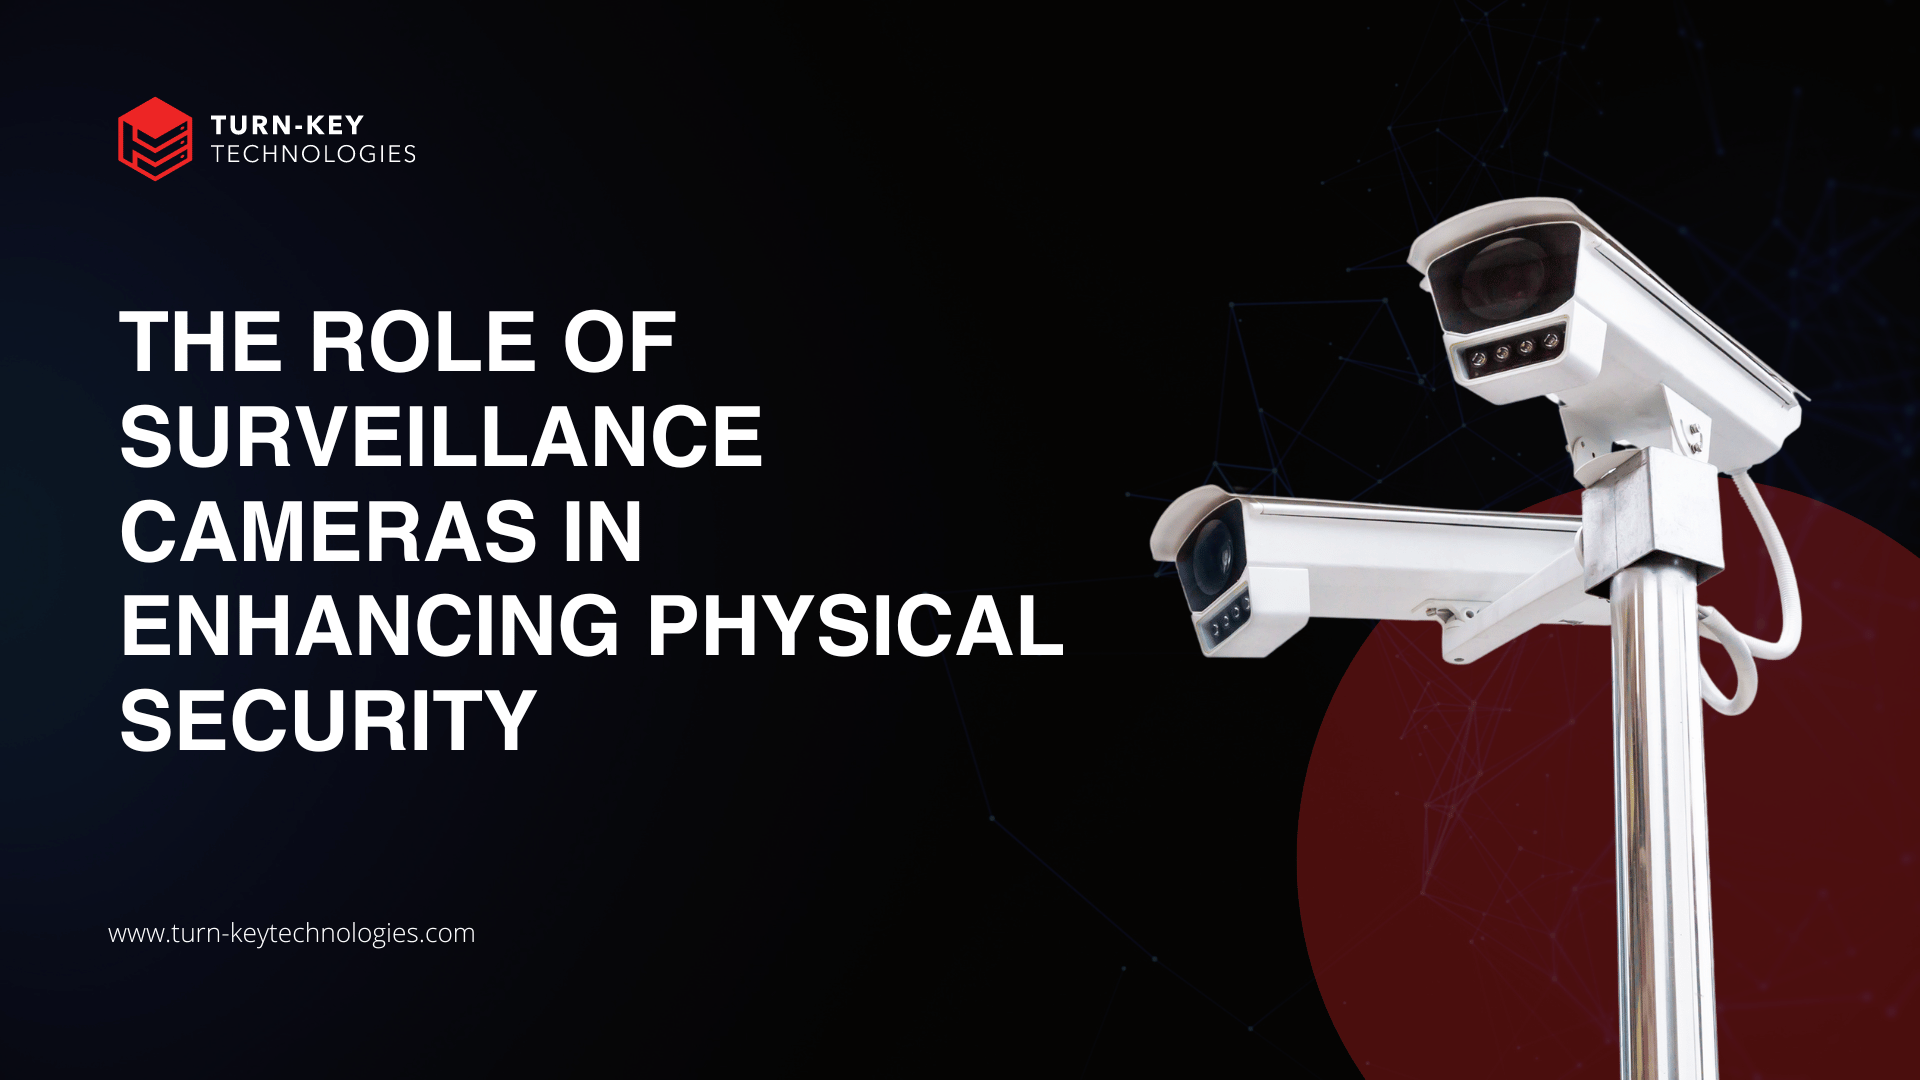 Surveillance Cameras in Enhancing Physical Security